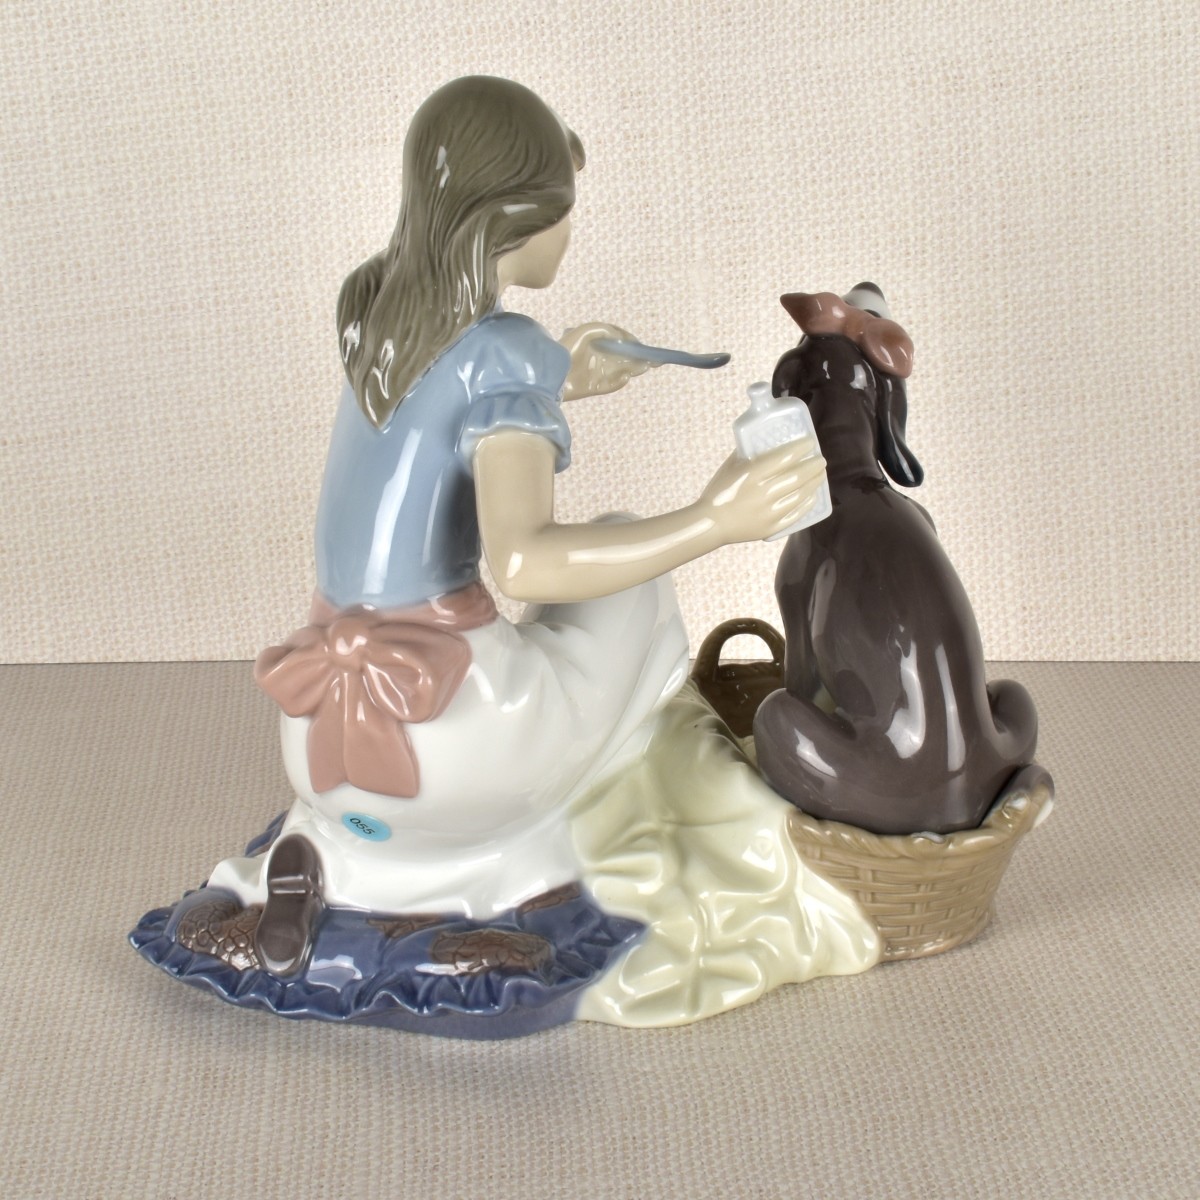 Lladro Figurine of a Girl and Dog